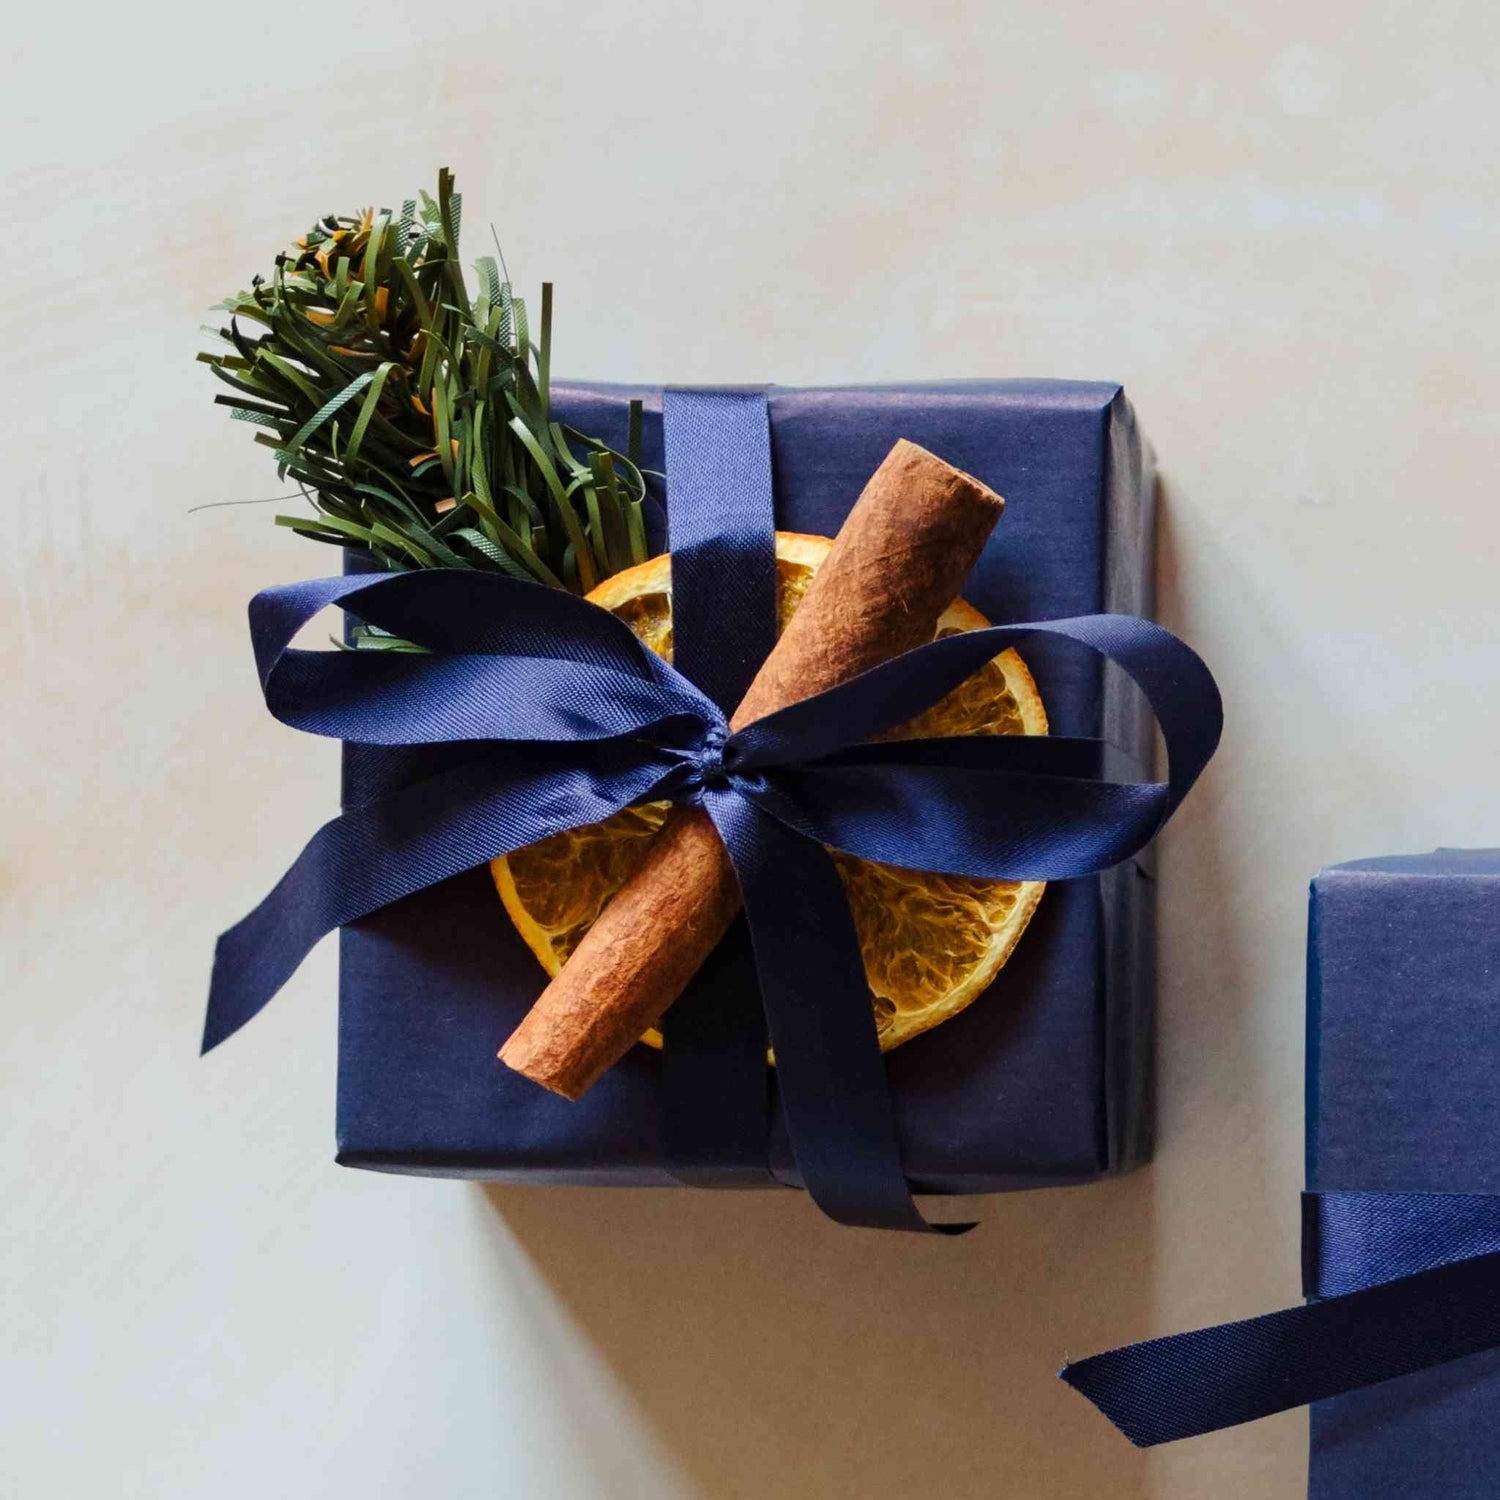 A 200g linen scented soy candle from the Home County Co. is shown with luxury Christmas Gift Wrap. The candle is wrapped in luxury navy wrapping paper secured with navy ribbon and Christmas embellishments.